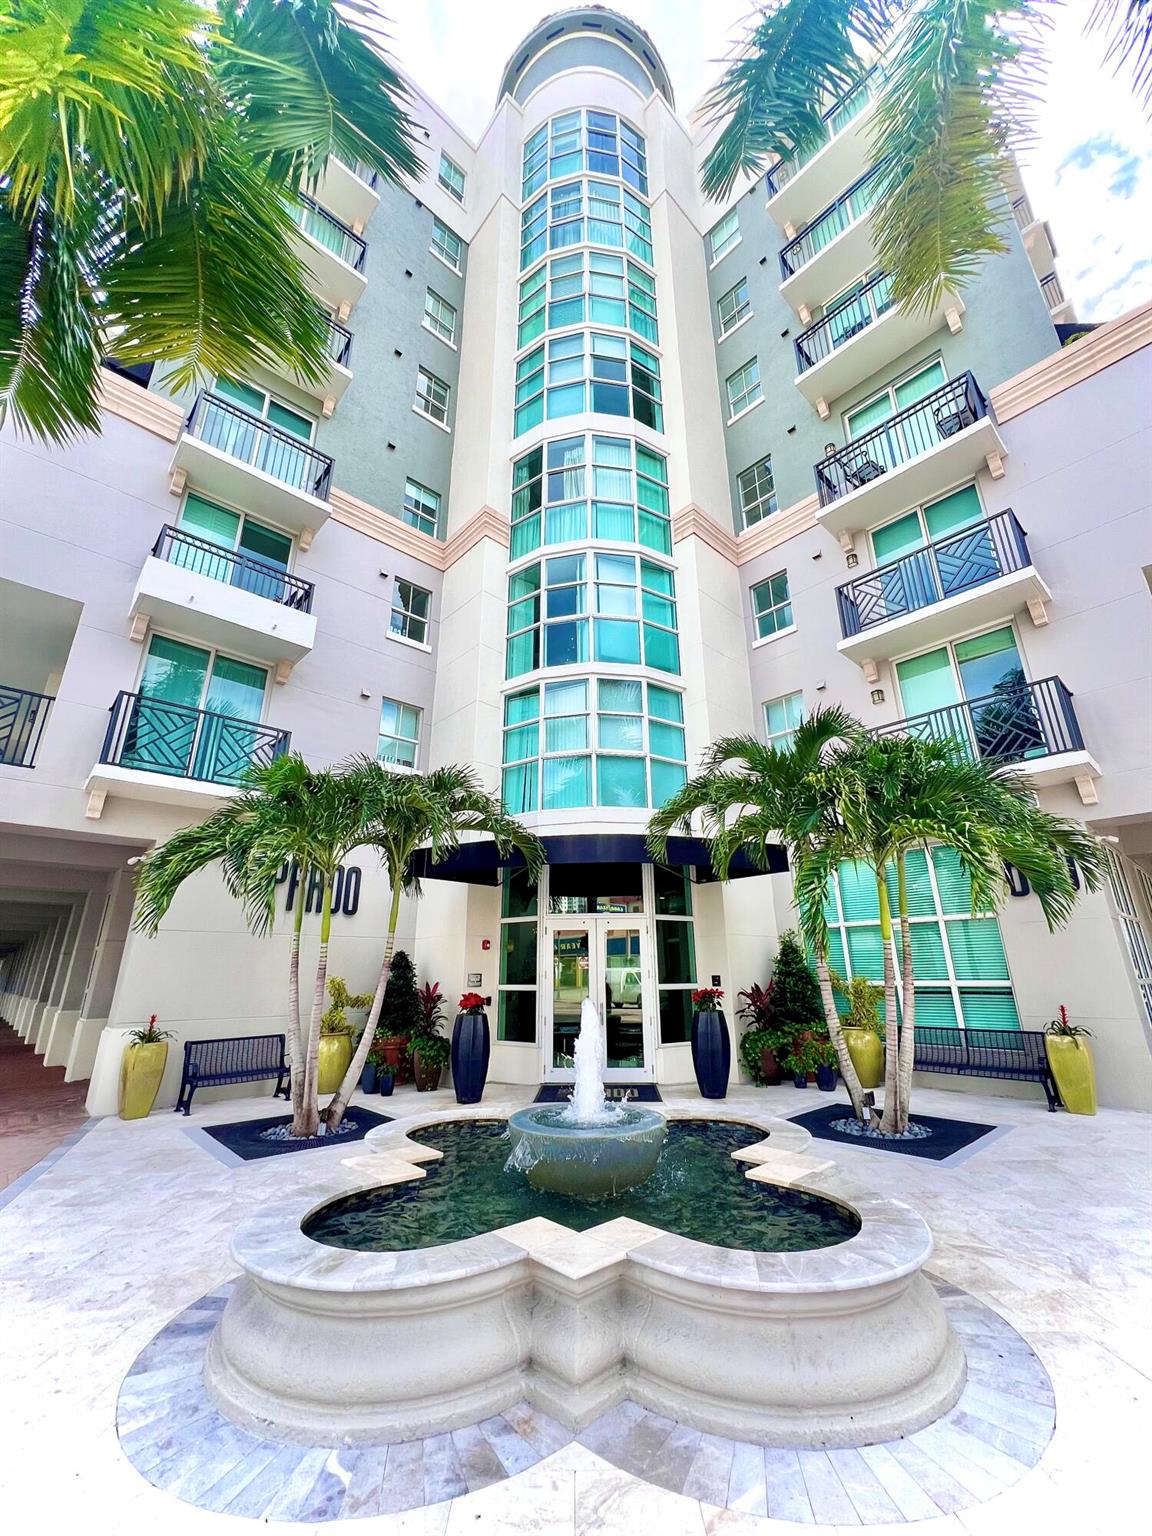 Be in the heart of downtown West Palm Beach in this move-in ready renovated 2 bedroom 2 bath condo comes FULLY FURNISHED/TURNKEY or UNFURNISHED. This unit is located on the 5th floor steps away from The Prado pool, jacuzzi-tub, steam room, courtyard, new fitness center, and new club house. Unit comes with 1 assigned parking space in the garage located inside the building. Just 1 block from the intracoastal waterfront, 2 blocks to Rosemary Square and the Brightline Station, and a few short blocks to Historic Clematis St. Just a 10 minute drive to PBI airport. Quick access to Ft. Lauderdale and Miami. *Investors* There is no waiting period to rent out. The leases can be a minimum of 30 days or more.